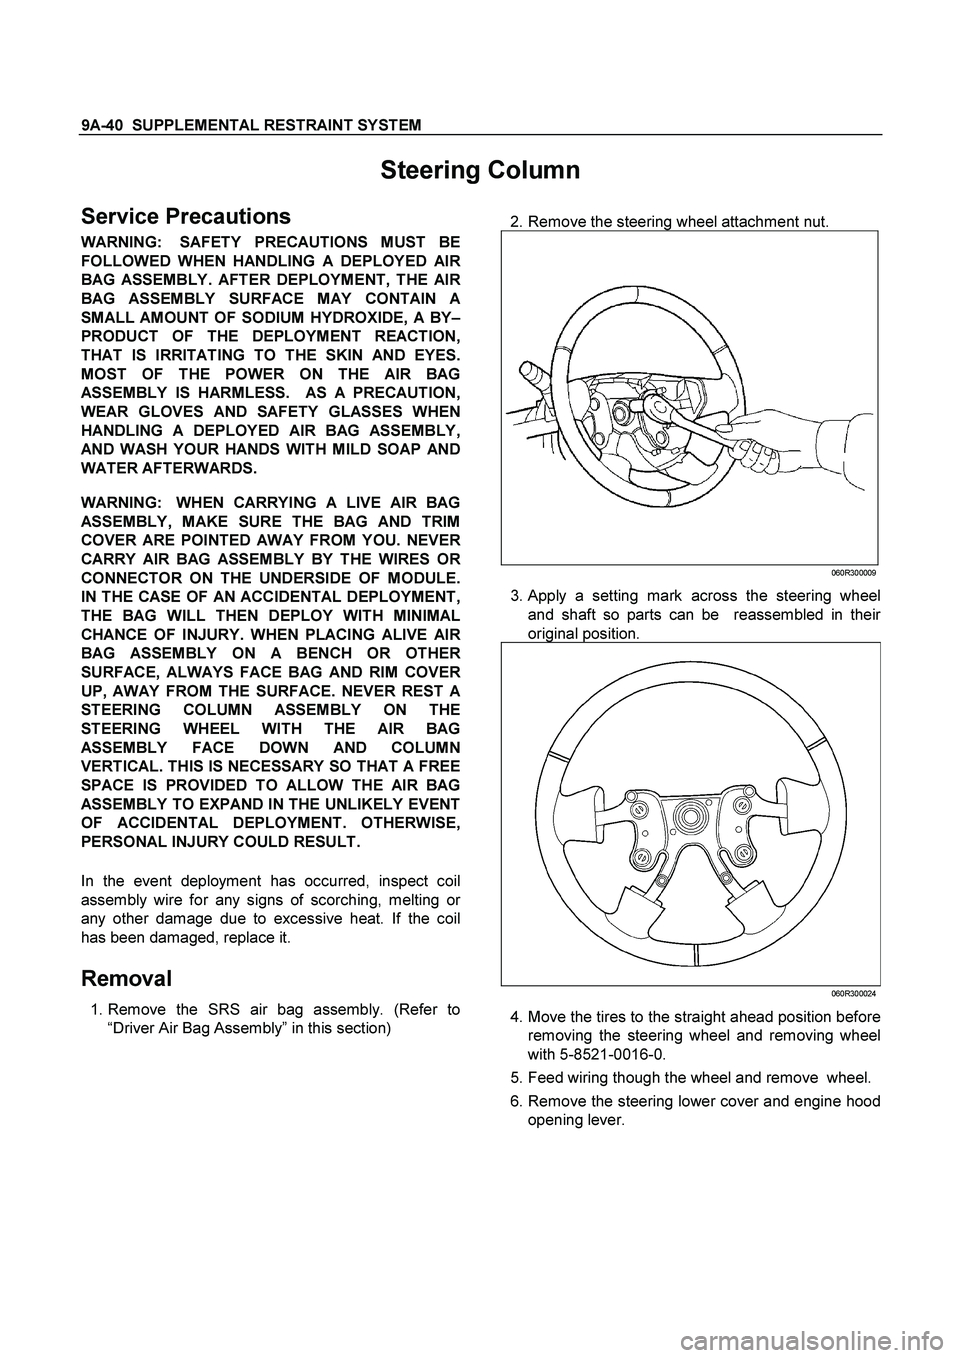 ISUZU TF SERIES 2004  Workshop Manual 9A-40  SUPPLEMENTAL RESTRAINT SYSTEM
 
Steering Column 
Service Precautions 
WARNING:  SAFETY PRECAUTIONS MUST BE
FOLLOWED WHEN HANDLING A DEPLOYED AI
R
BAG ASSEMBLY. AFTER DEPLOYMENT, THE AIR
BAG ASS